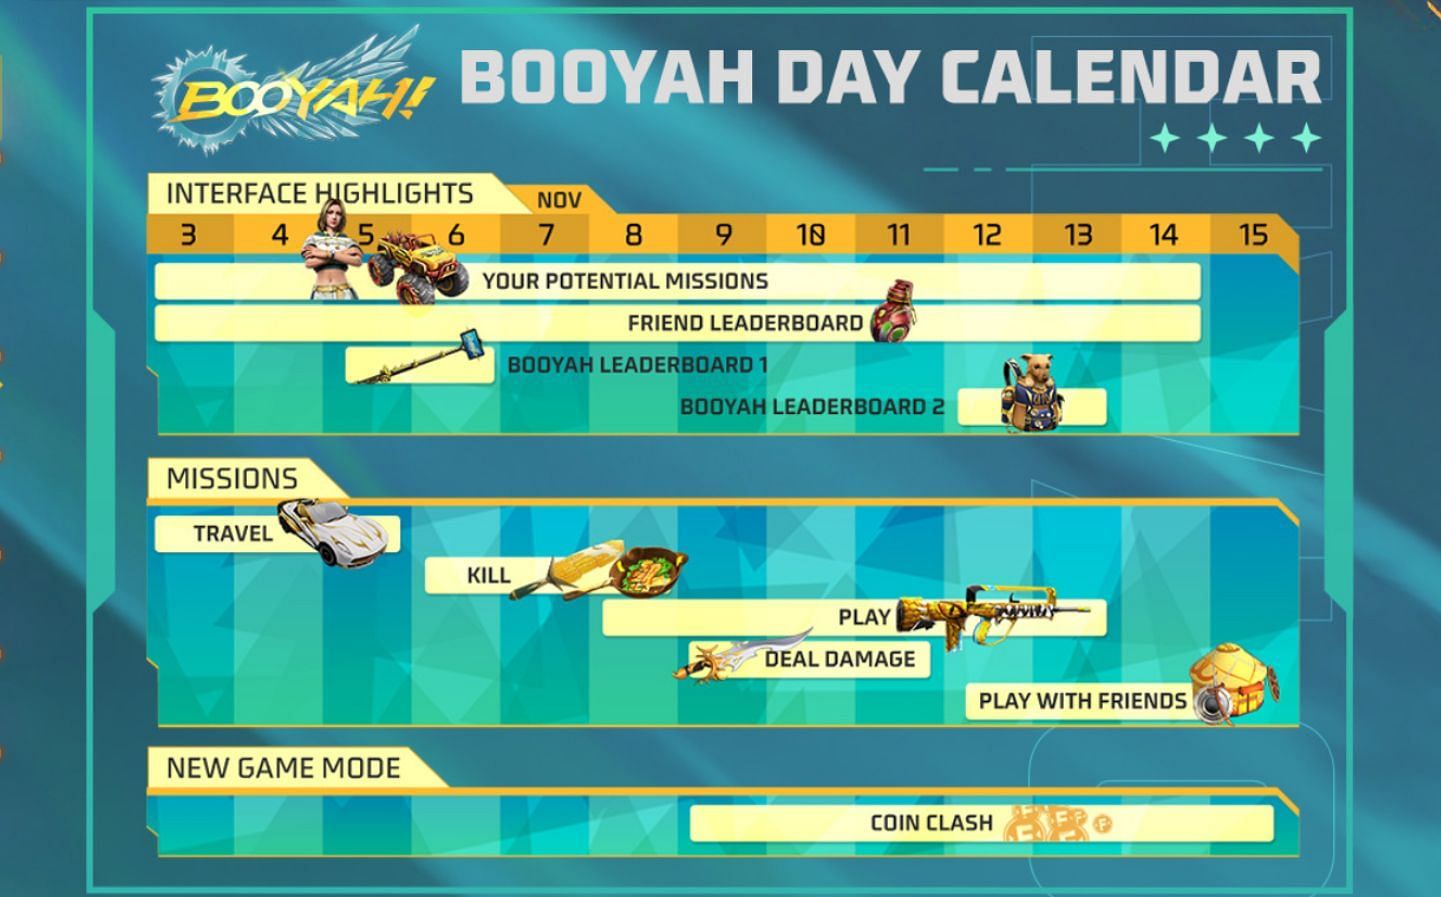 Booyah Day calendar showing events from November 3 to 15 (Image via Garena)